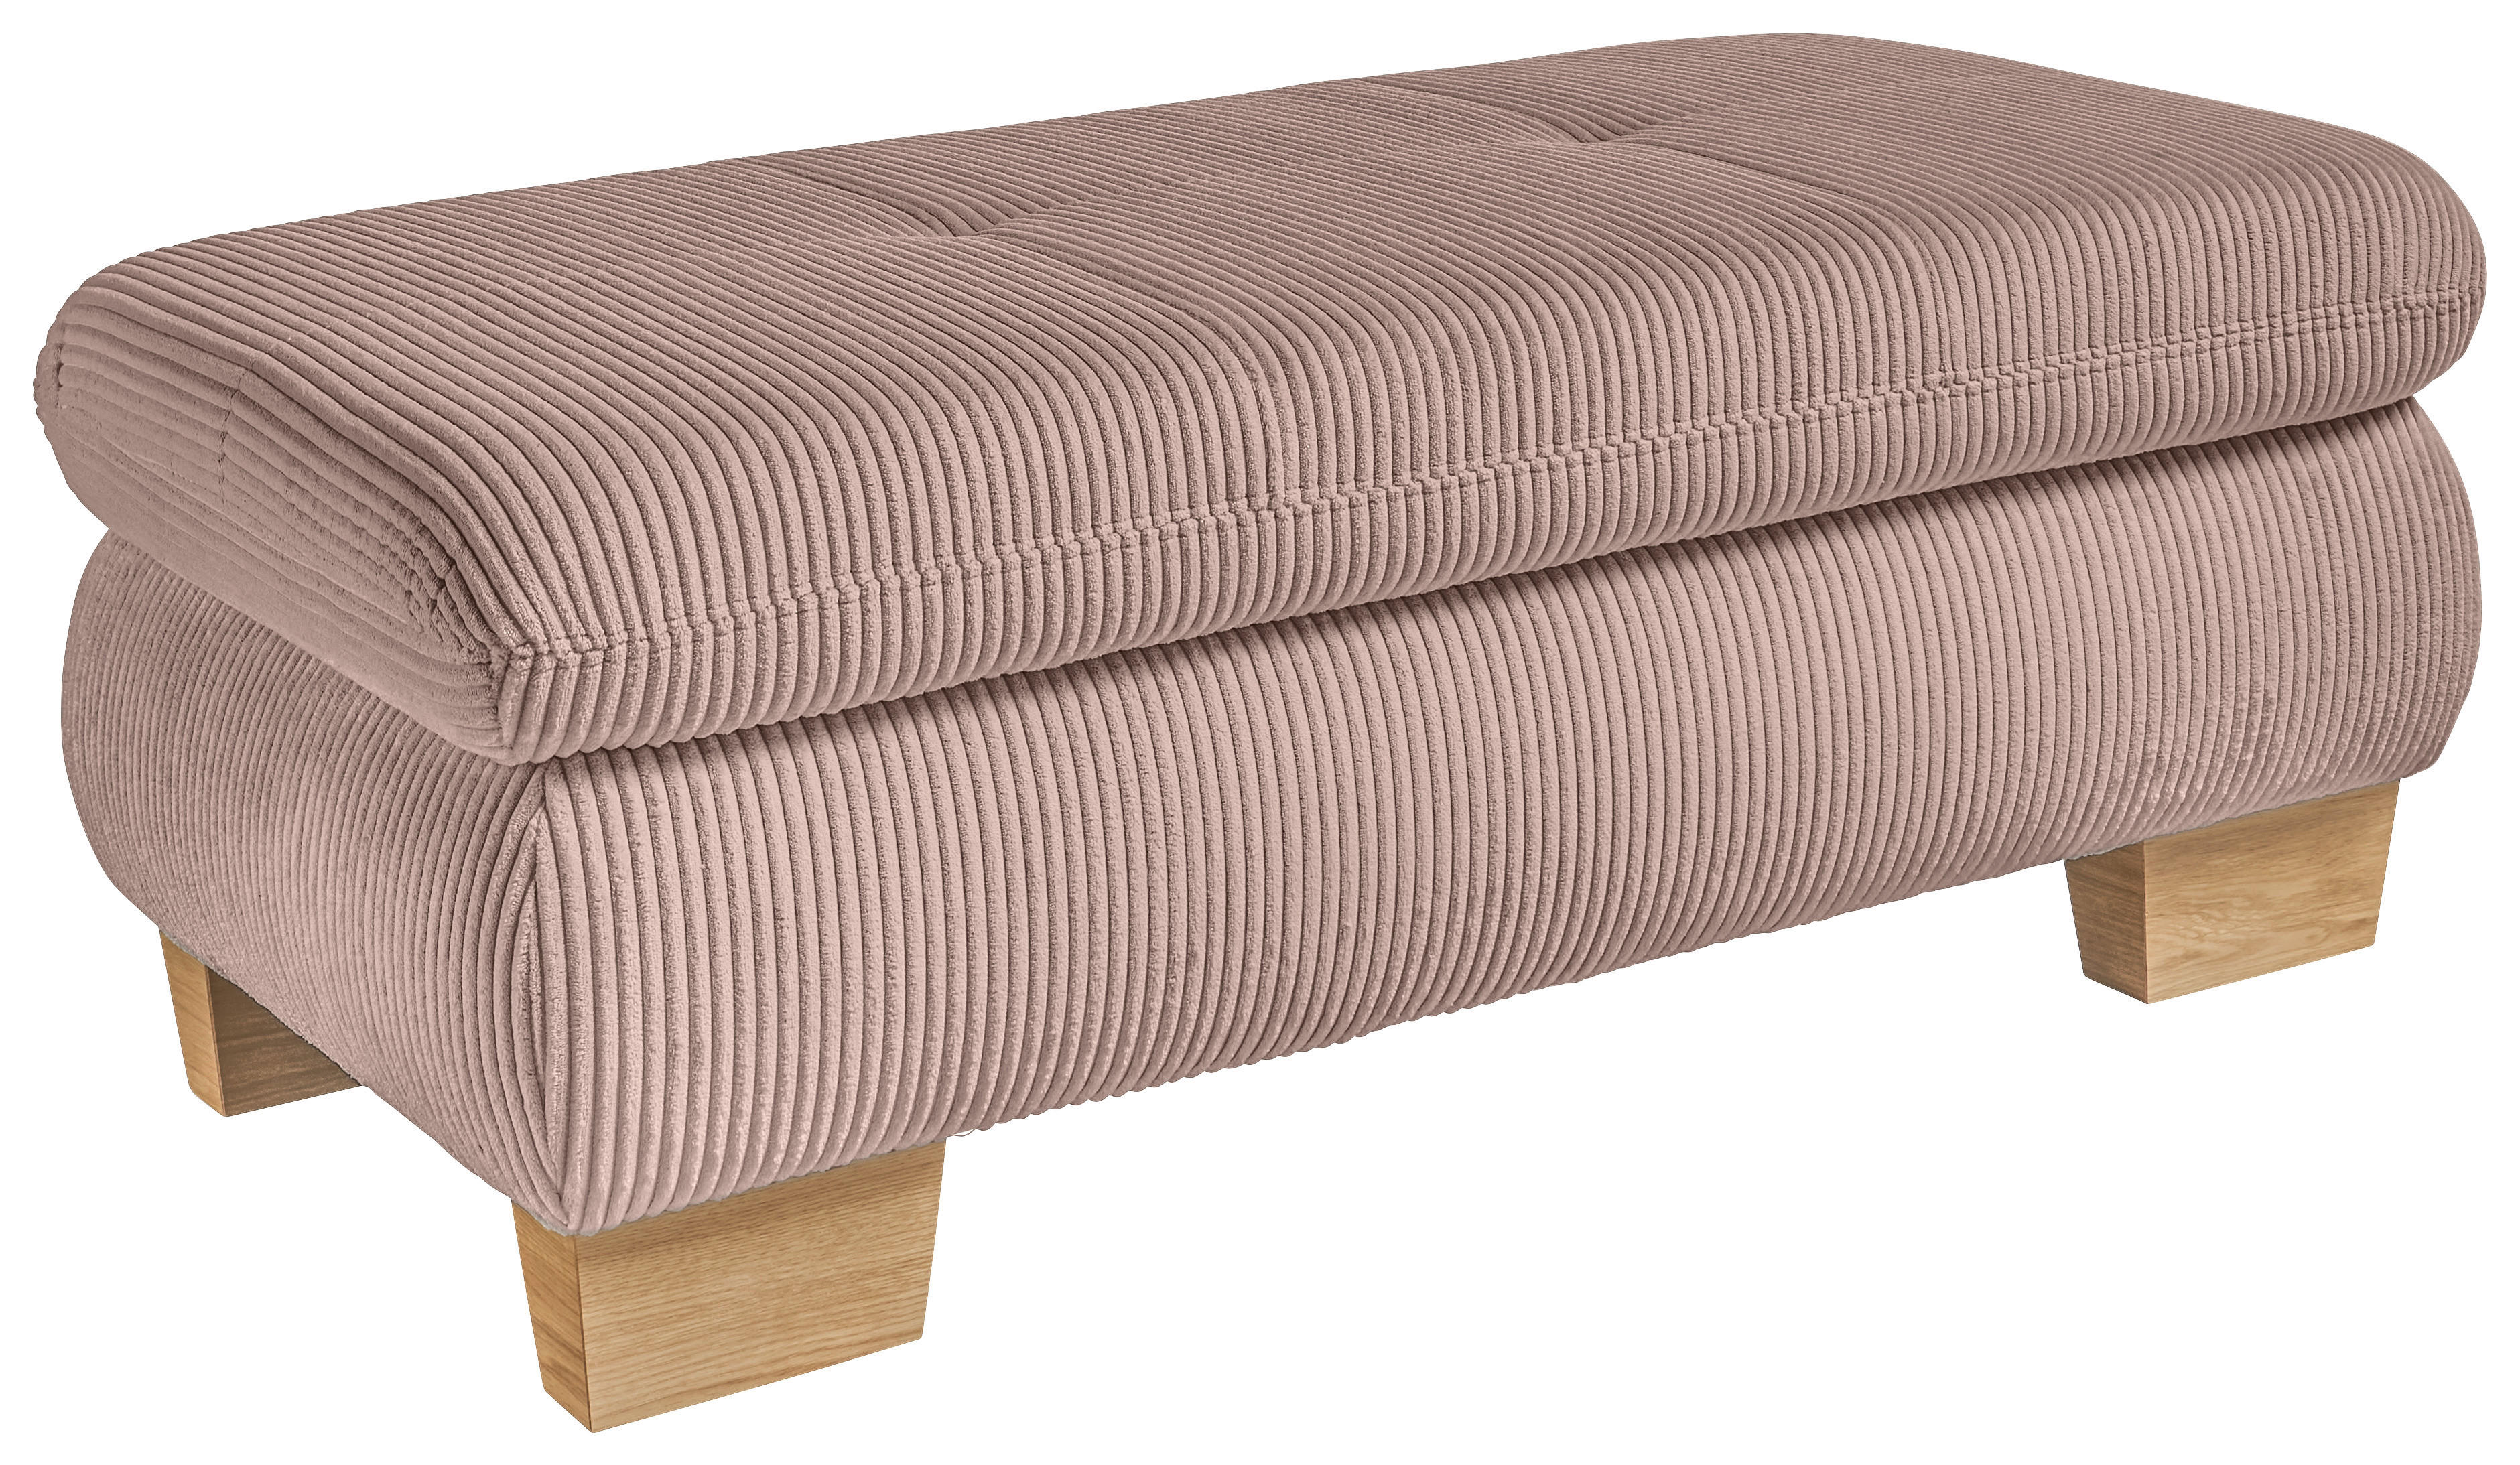 HOCKER Cord Rosa  - Eiche Bianco/Rosa, KONVENTIONELL, Holz/Textil (129/49/64cm) - SetOne by Musterring